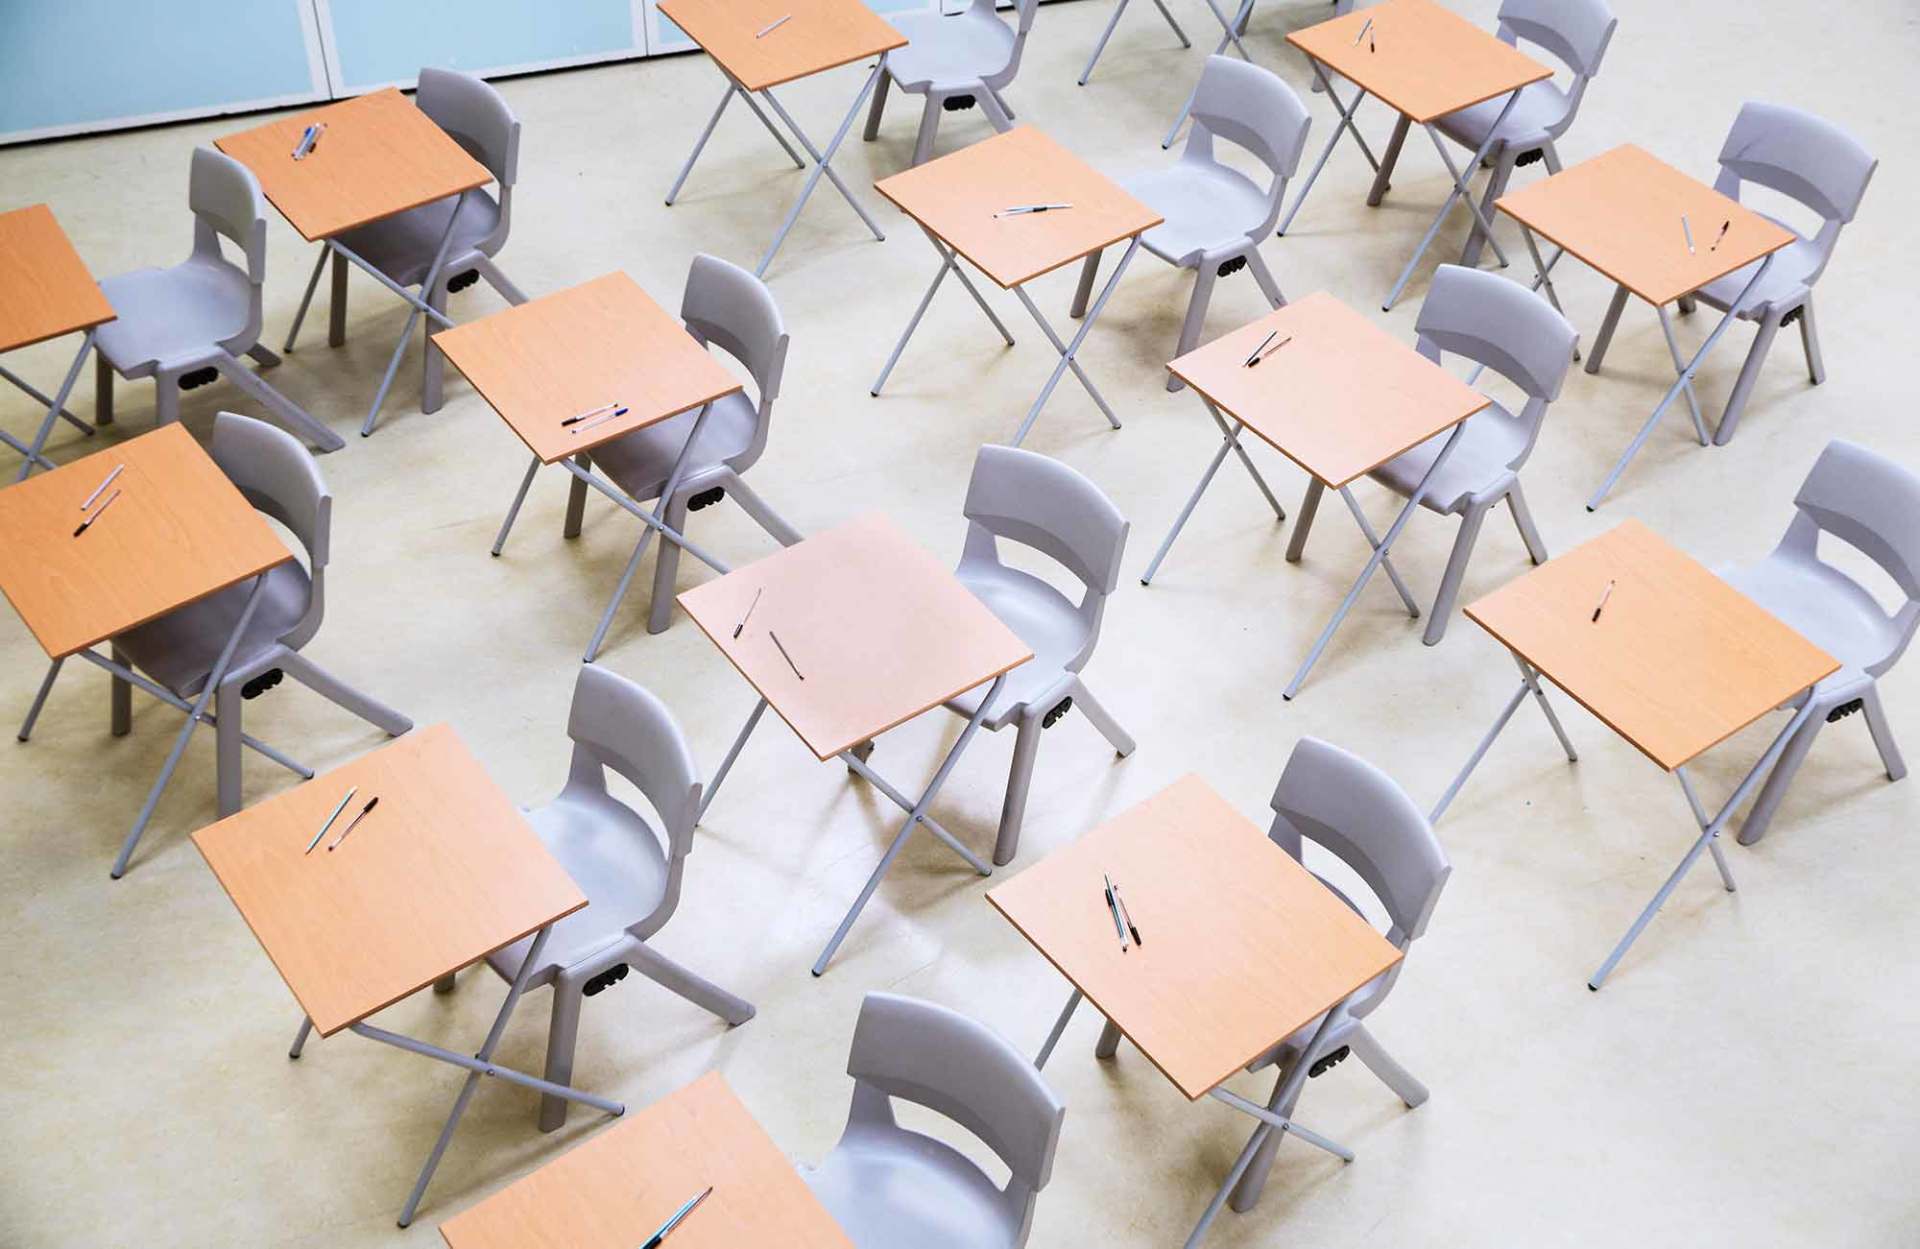 Elevated view of rows of desks and chairs in empty classroom